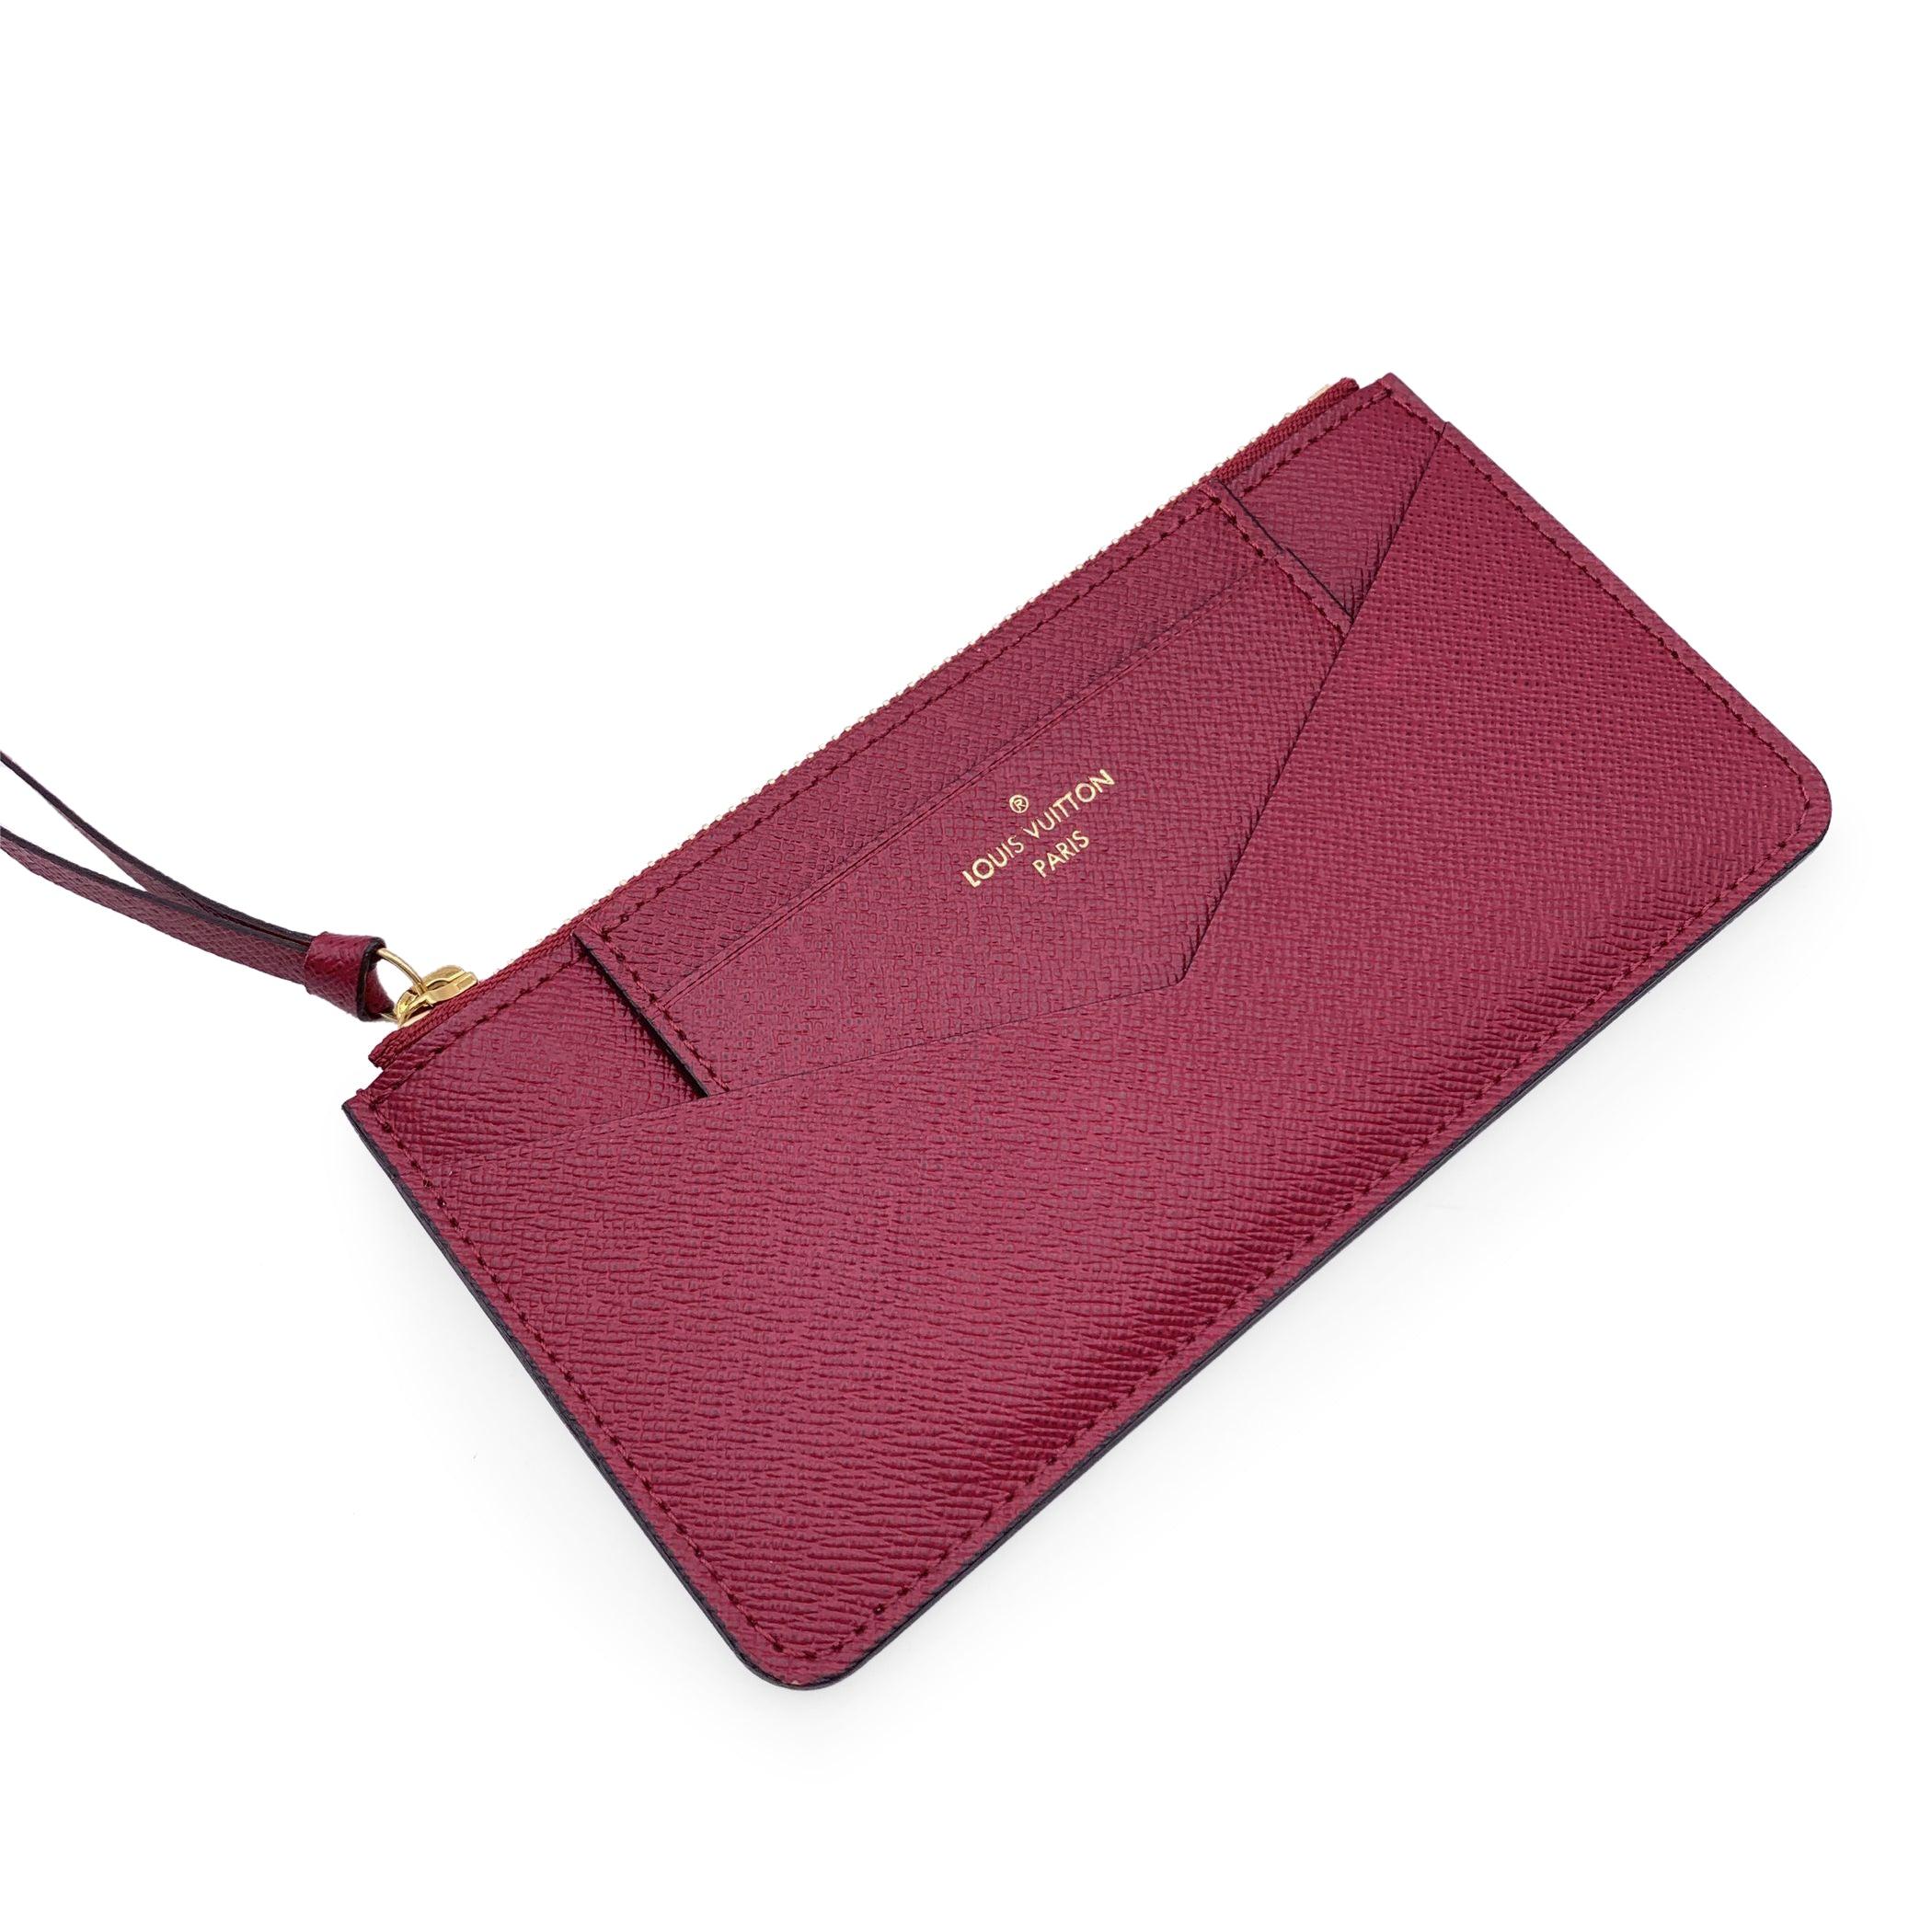 A set of 2 Louis Vuitton's Accessories for the Jeanne wallet: 1 zippered pouch for coins, to be inserted inside the main compartment of the wallet and 1 removable card holder to be inserted in the front pocket. Crafted in magenta leather. 'Louis